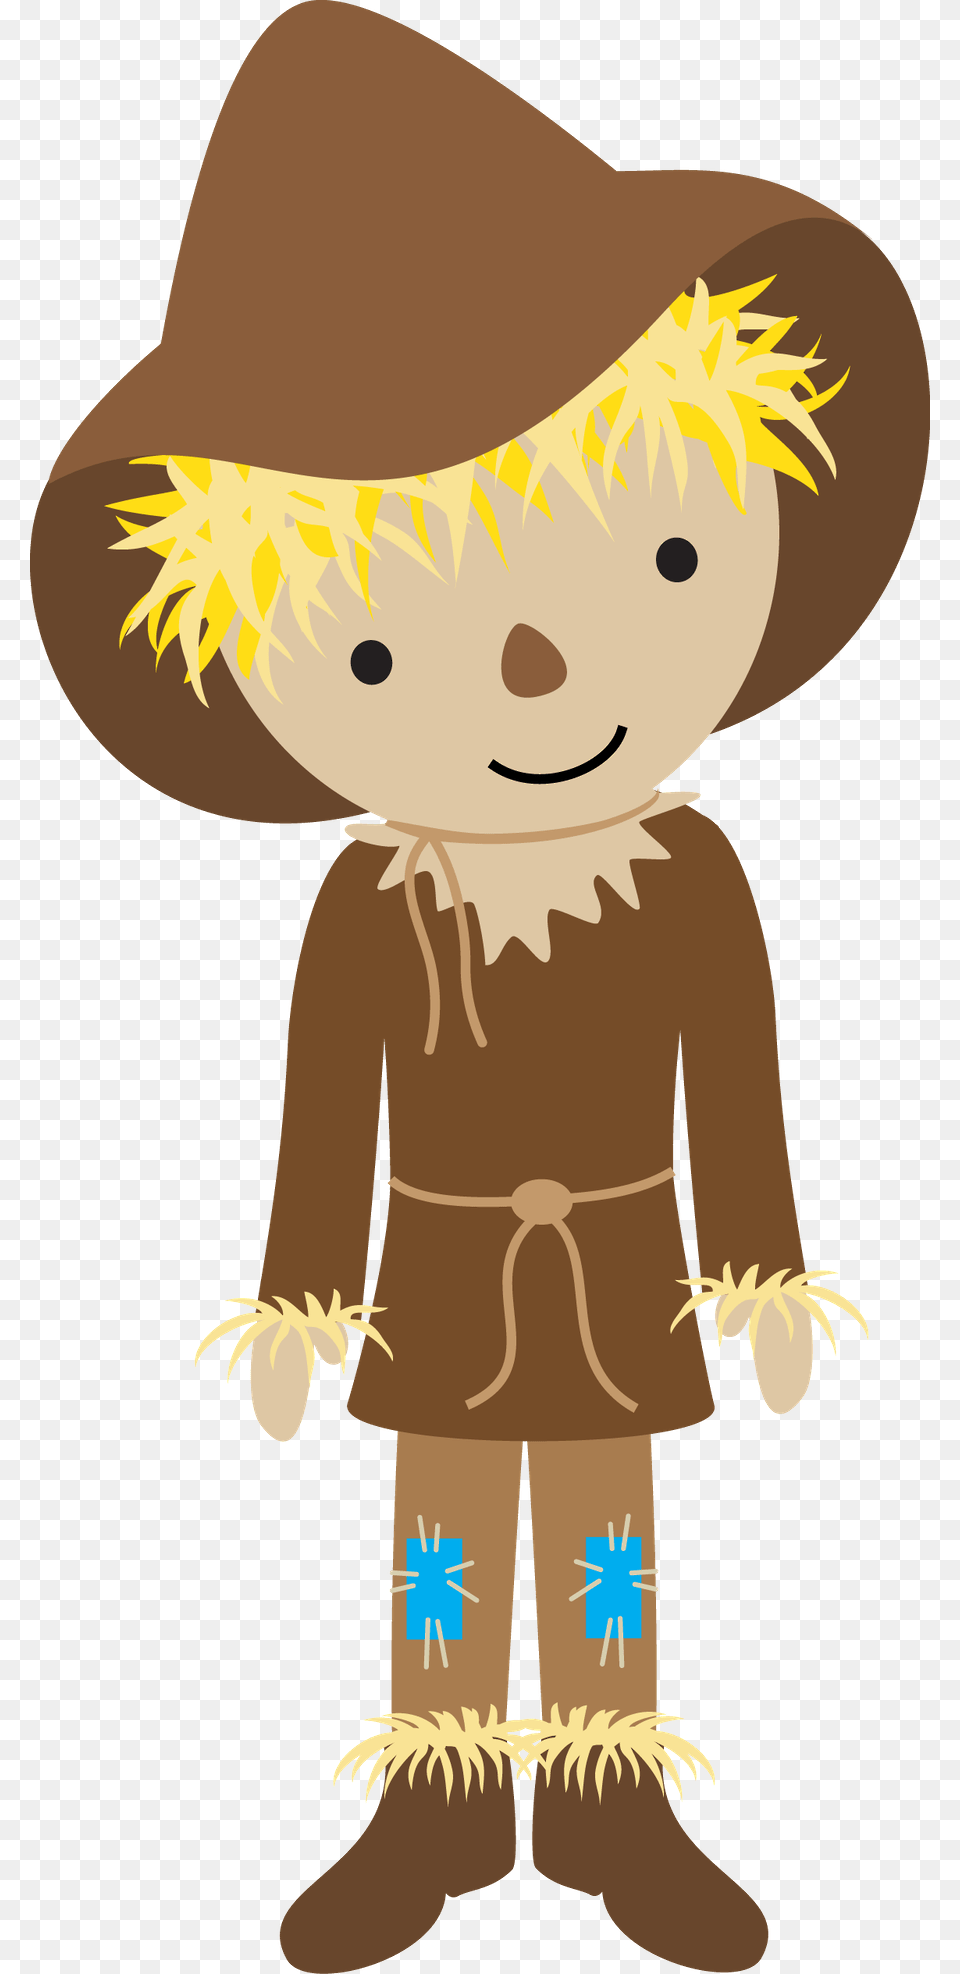 Collection Of Scarecrow Clipart Wizard Of Oz Scarecrow Wizard Of Oz Clip Art, Clothing, Hat, Baby, Person Free Png Download